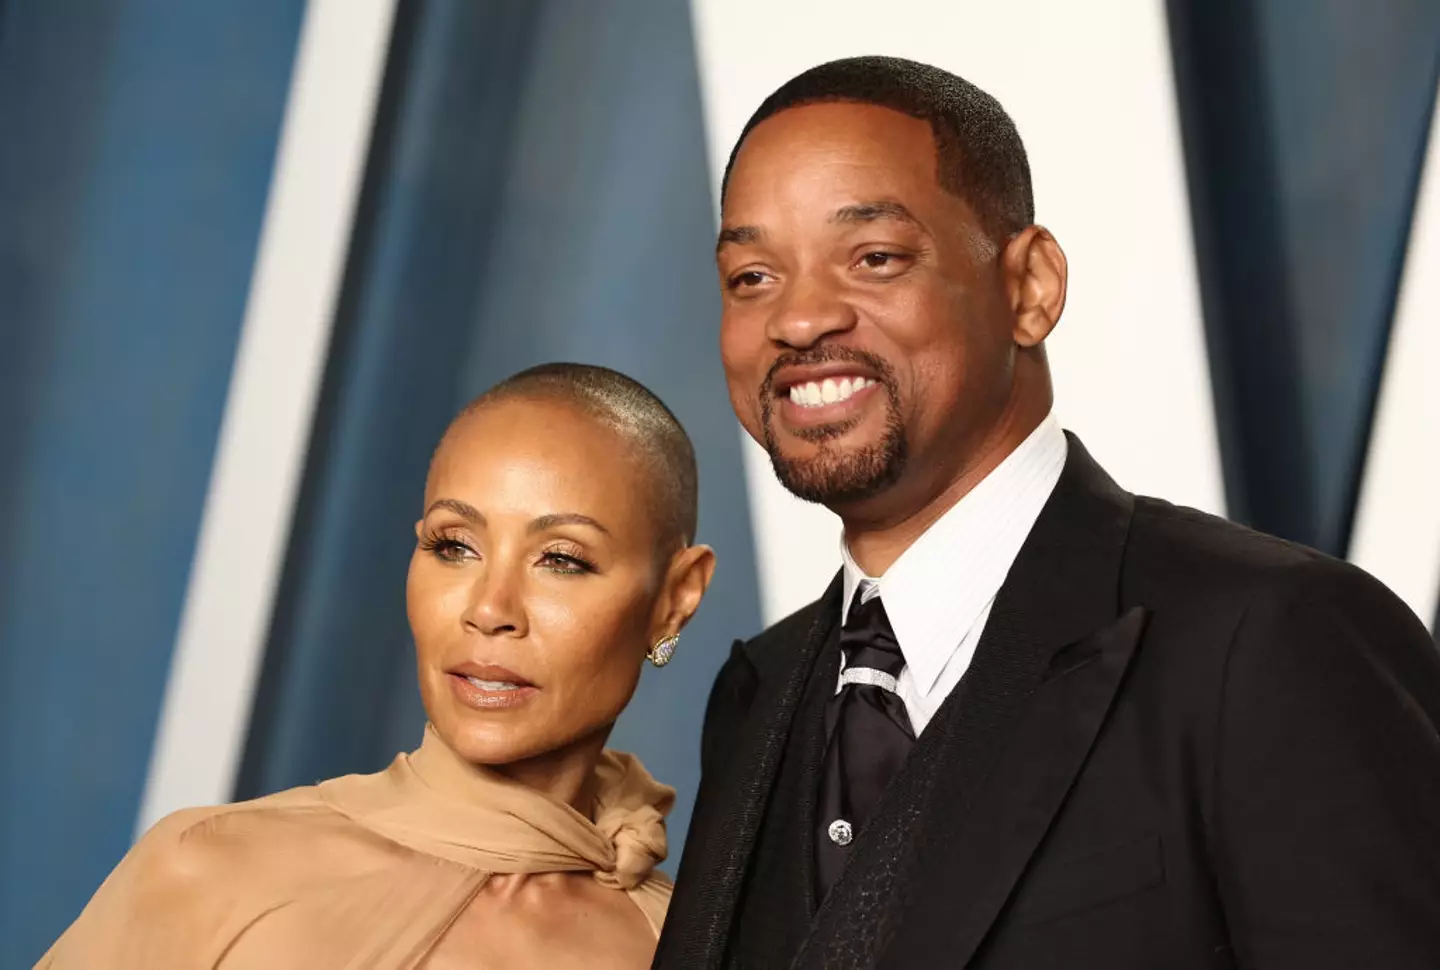 Jada Pinkett-Smith has confirmed that Will Smith will take legal action over the person who alleged the actor had sex with a male co-star.